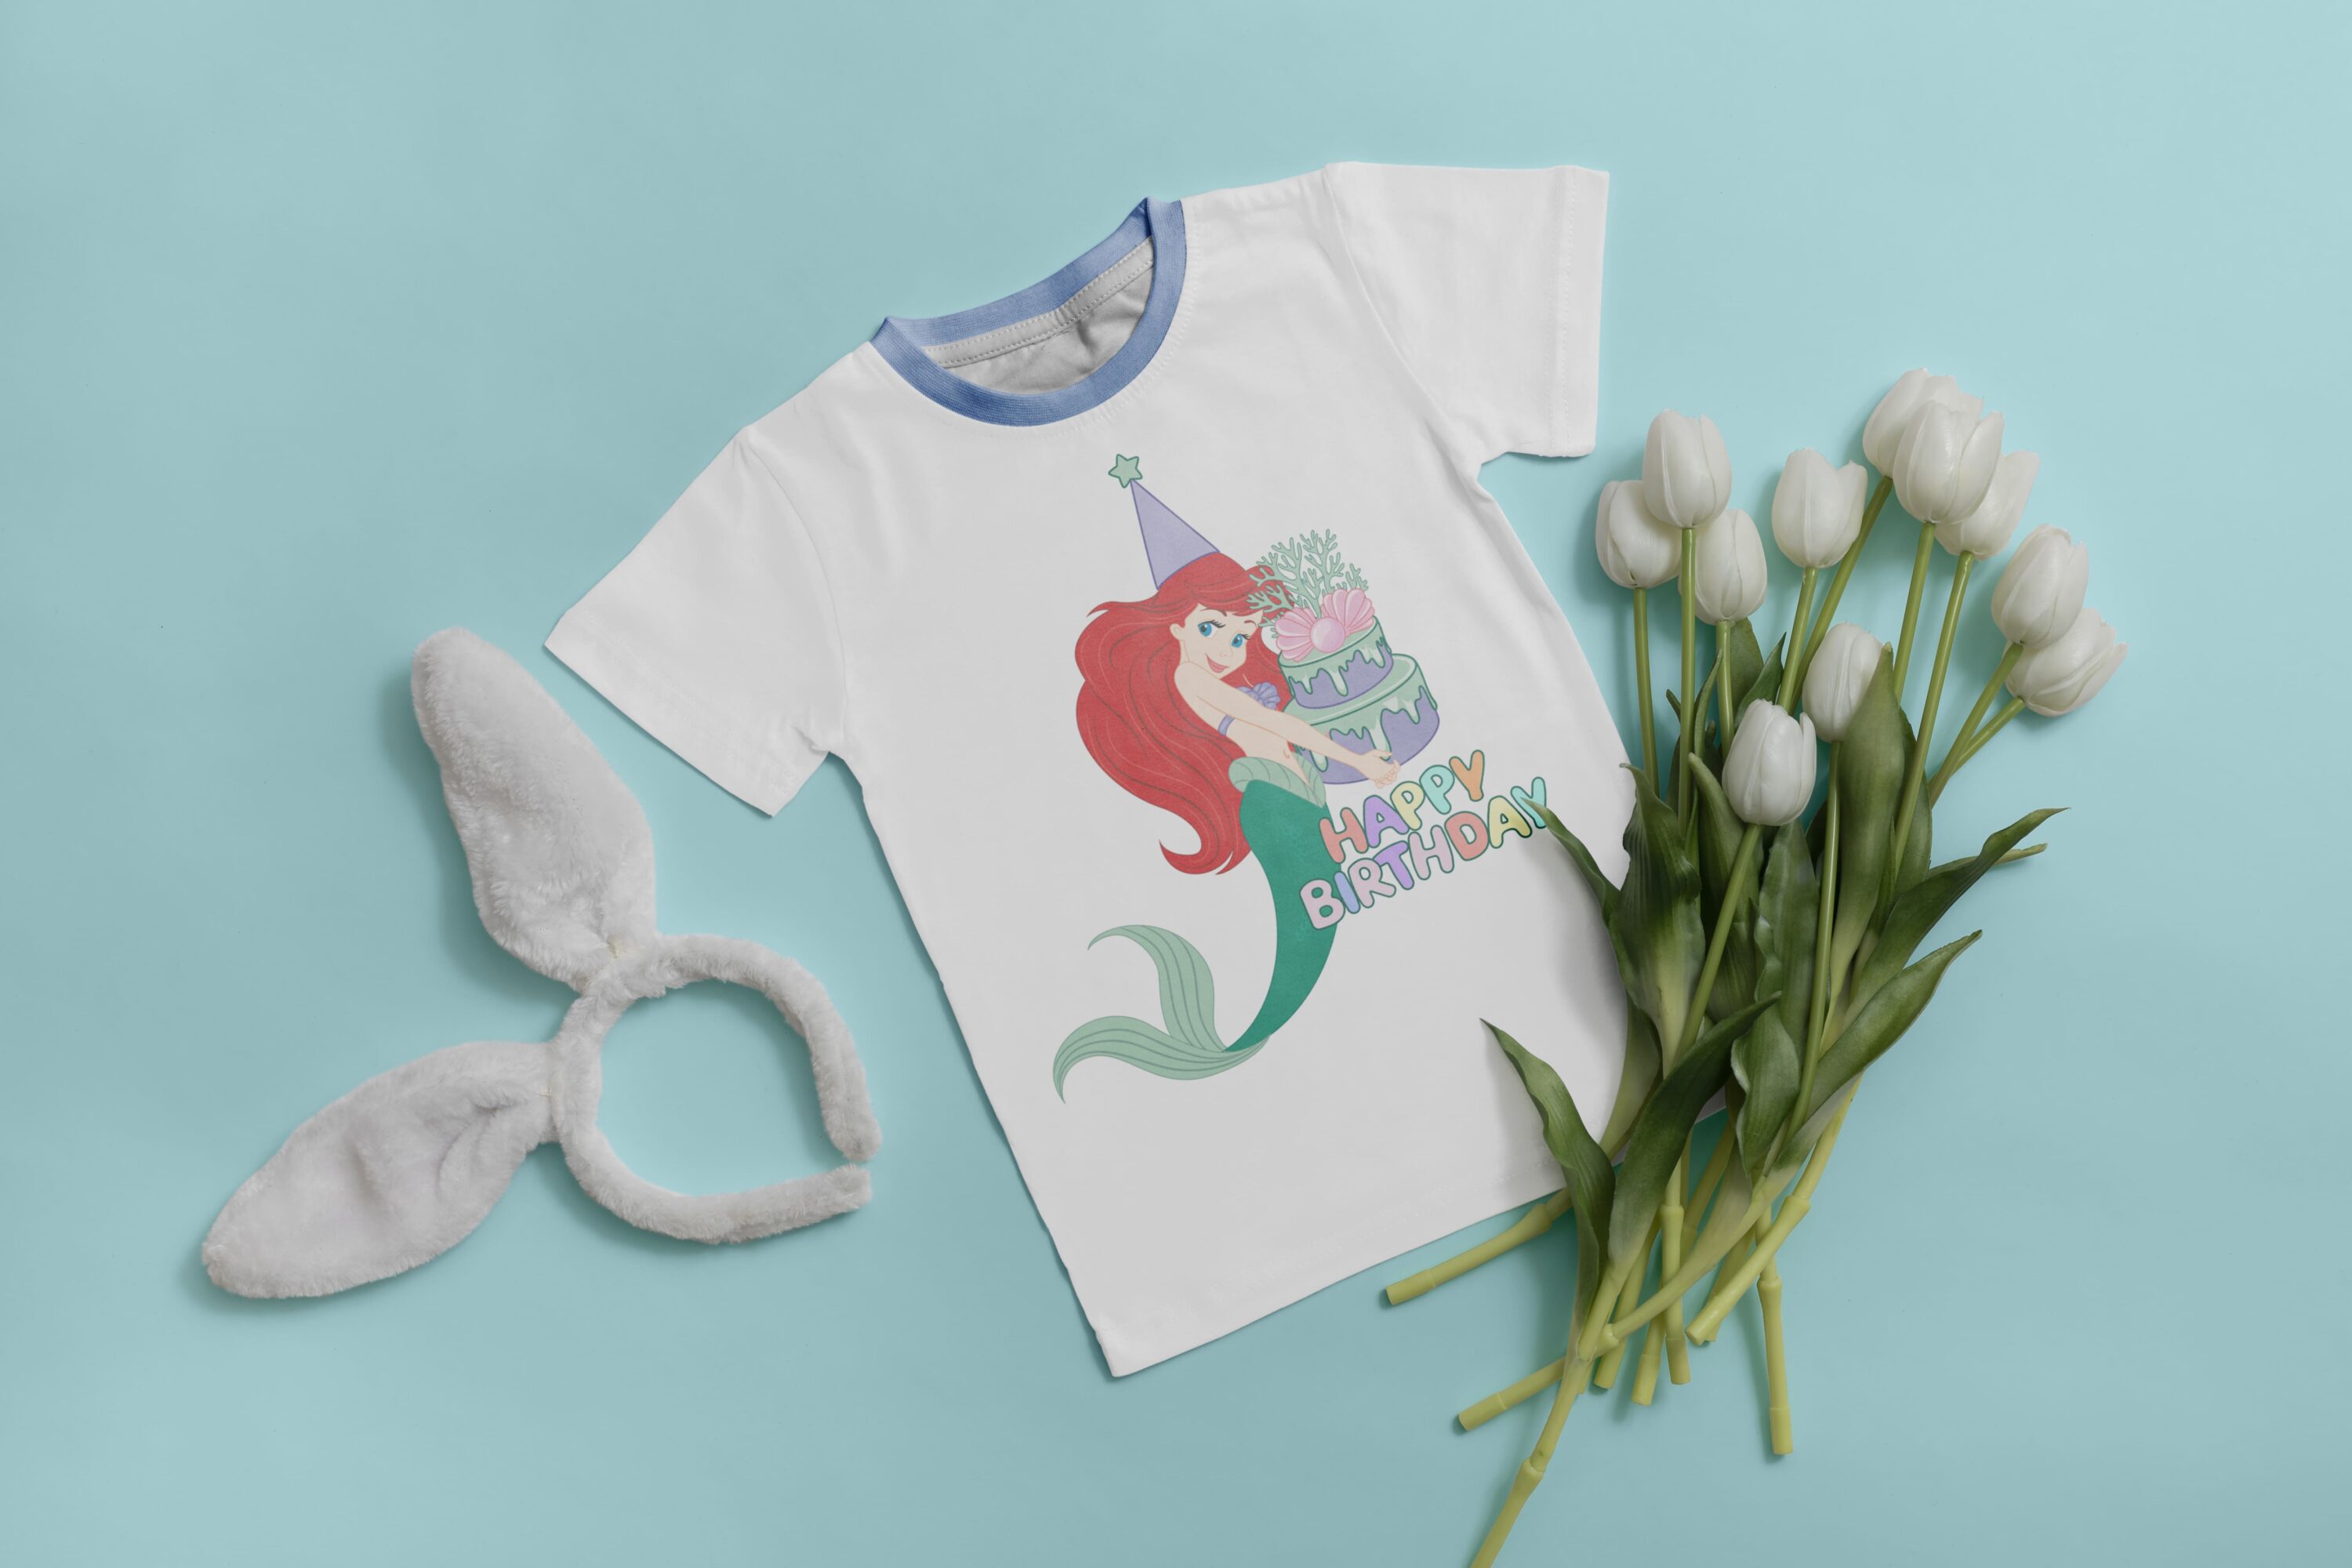 Ears, flowers and print on a mermaid t-shirt.